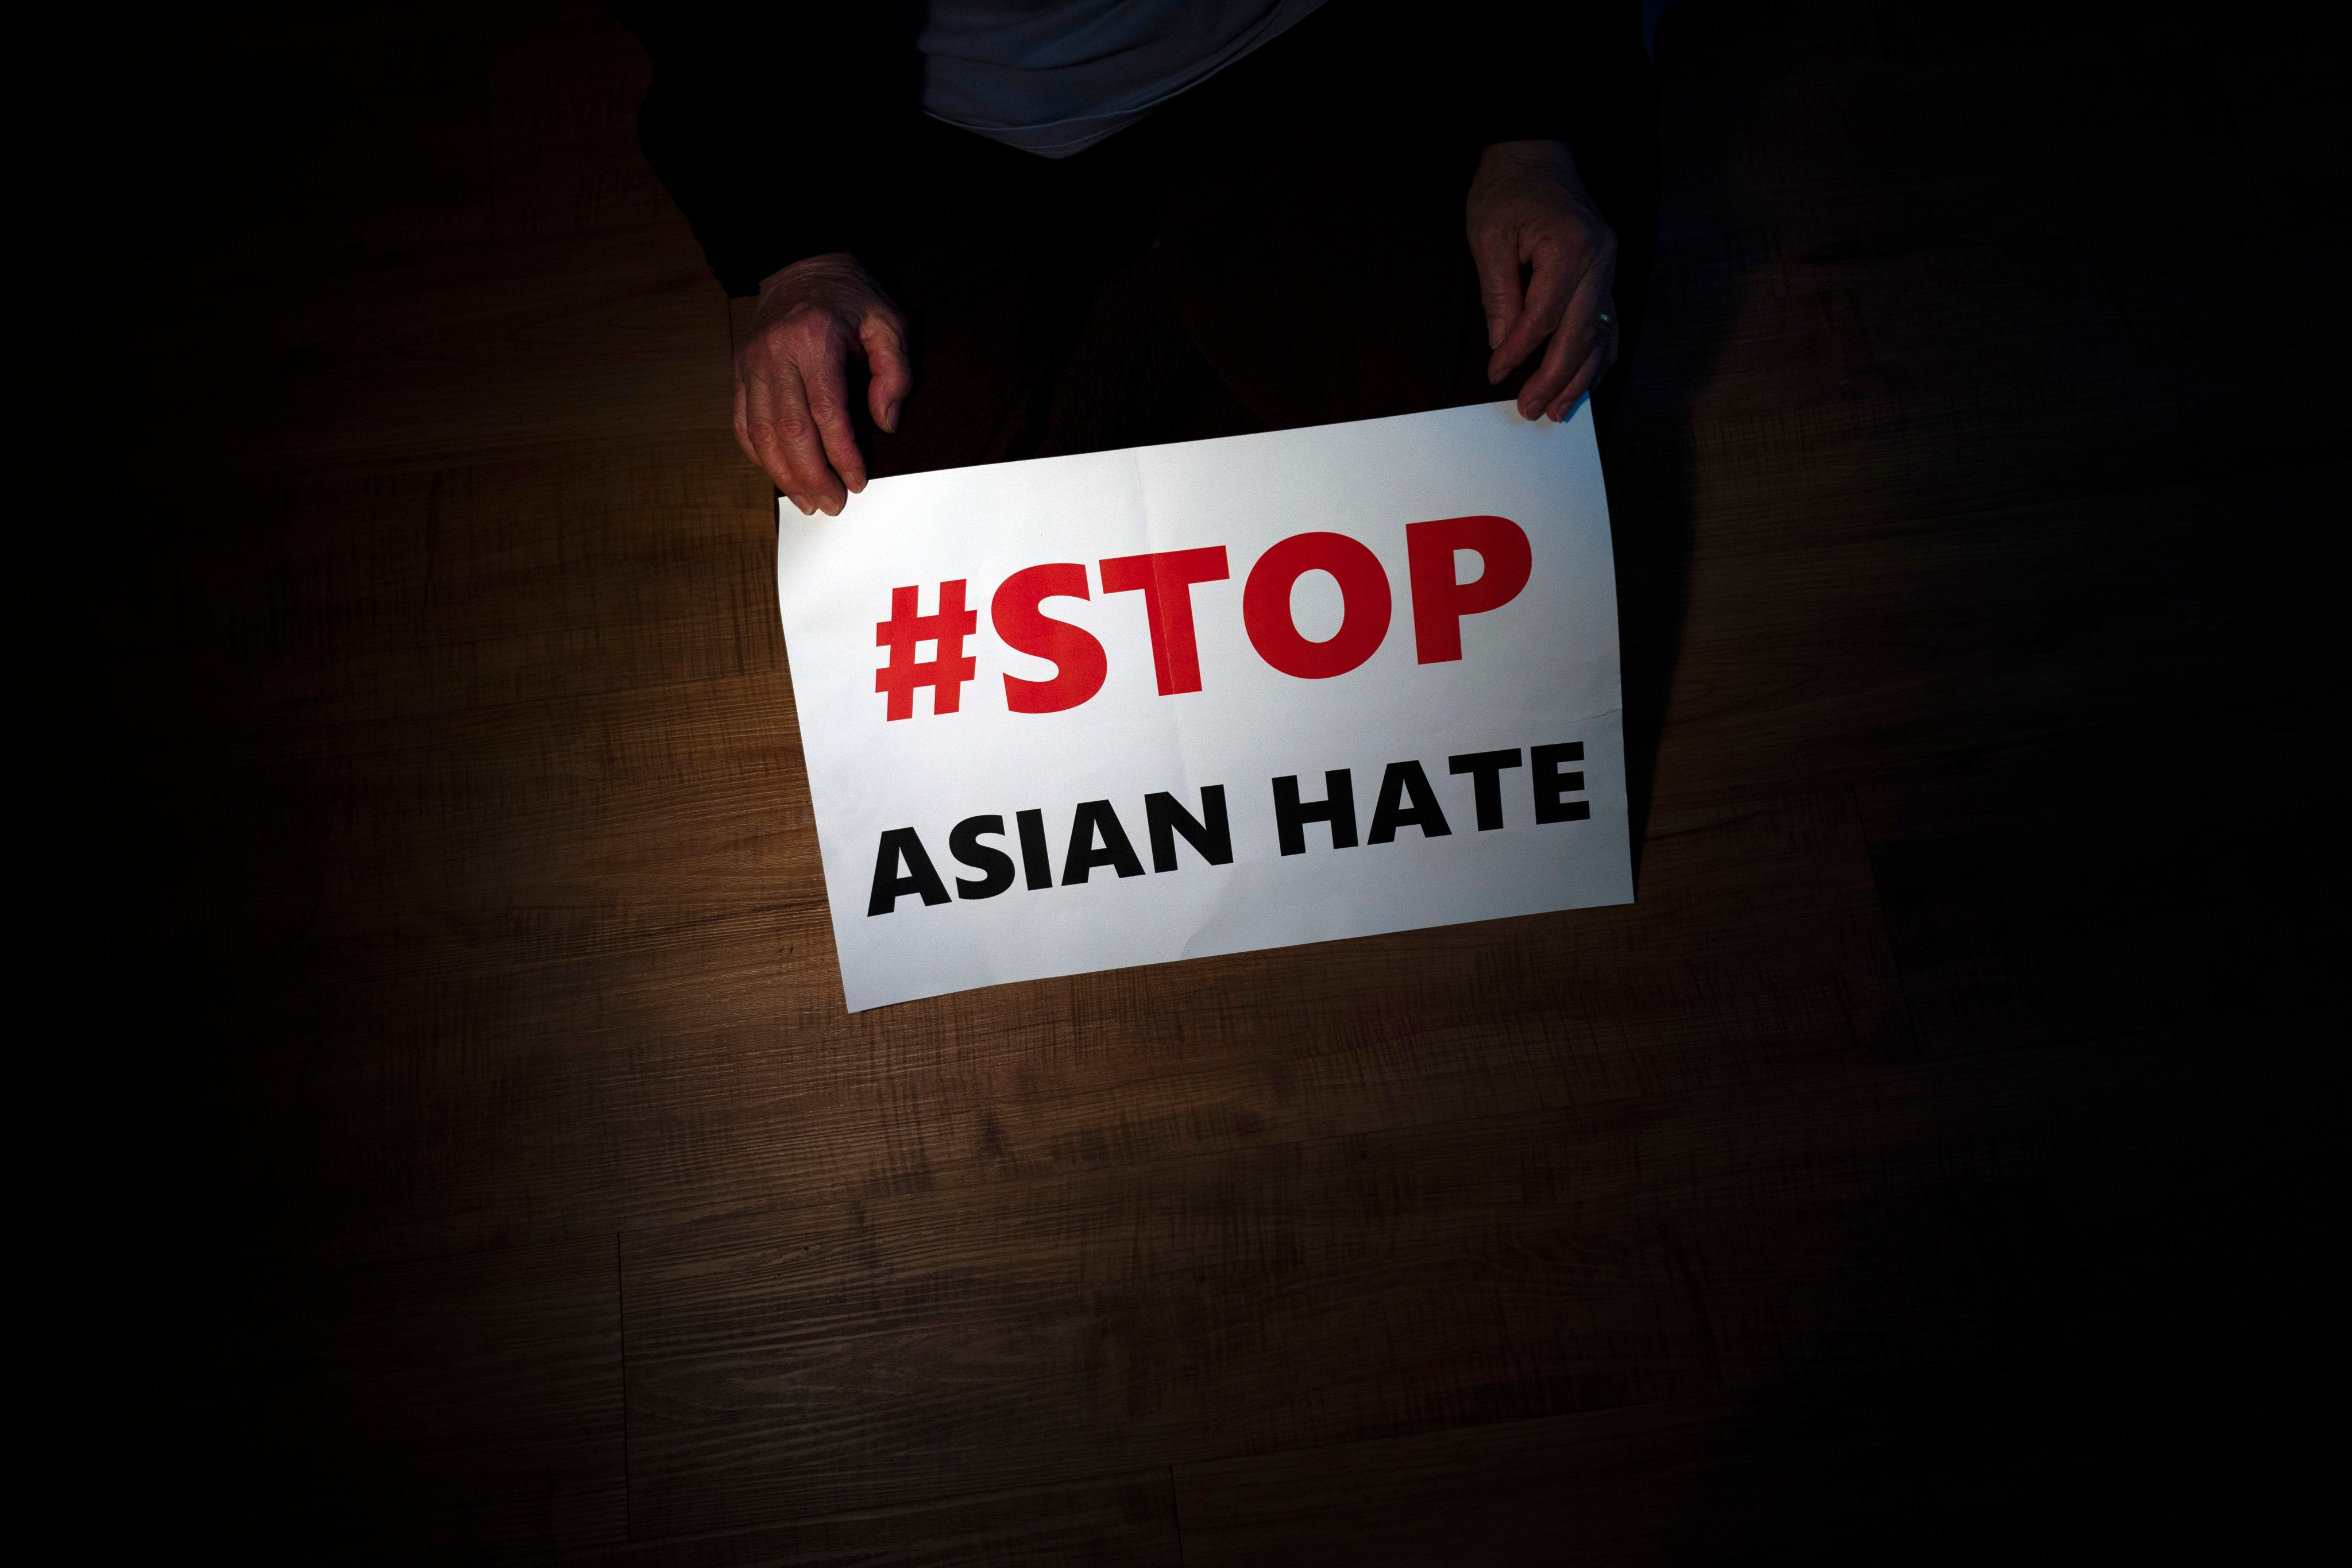 About 2 in 10 Asian Americans and Pacific Islanders say they have experienced being verbally harassed or abused in the last year. File photo: AP